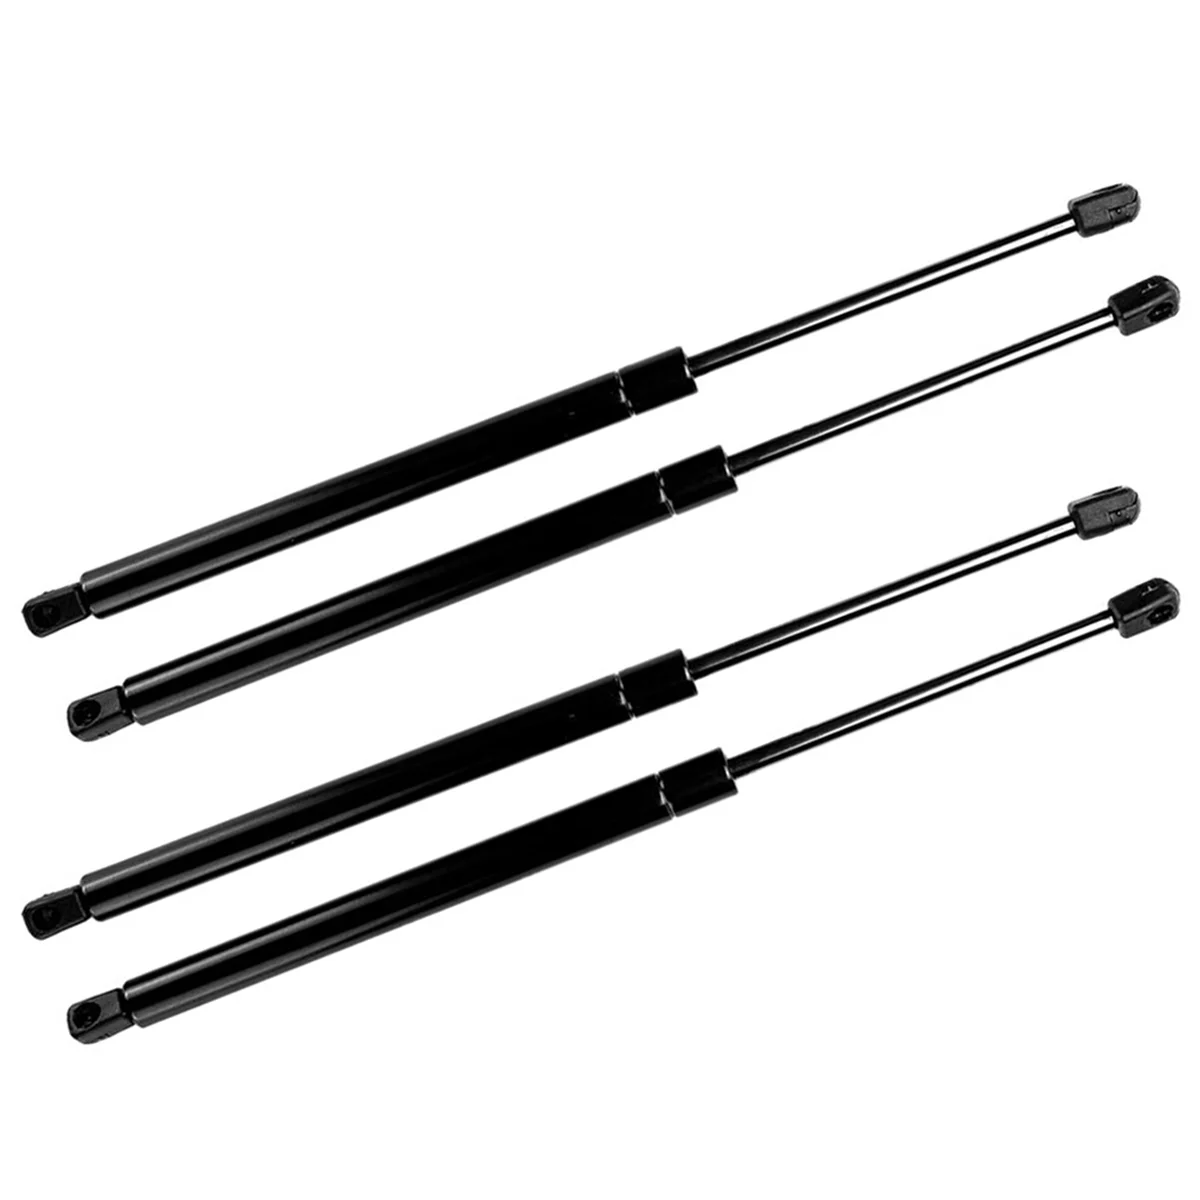 

4Pcs Car Rear Tailgate Boot Gas Spring Struts Prop Lift Support for HYUNDAI I10 (PA) Hatchback 2007-2015 GSHI0515-A